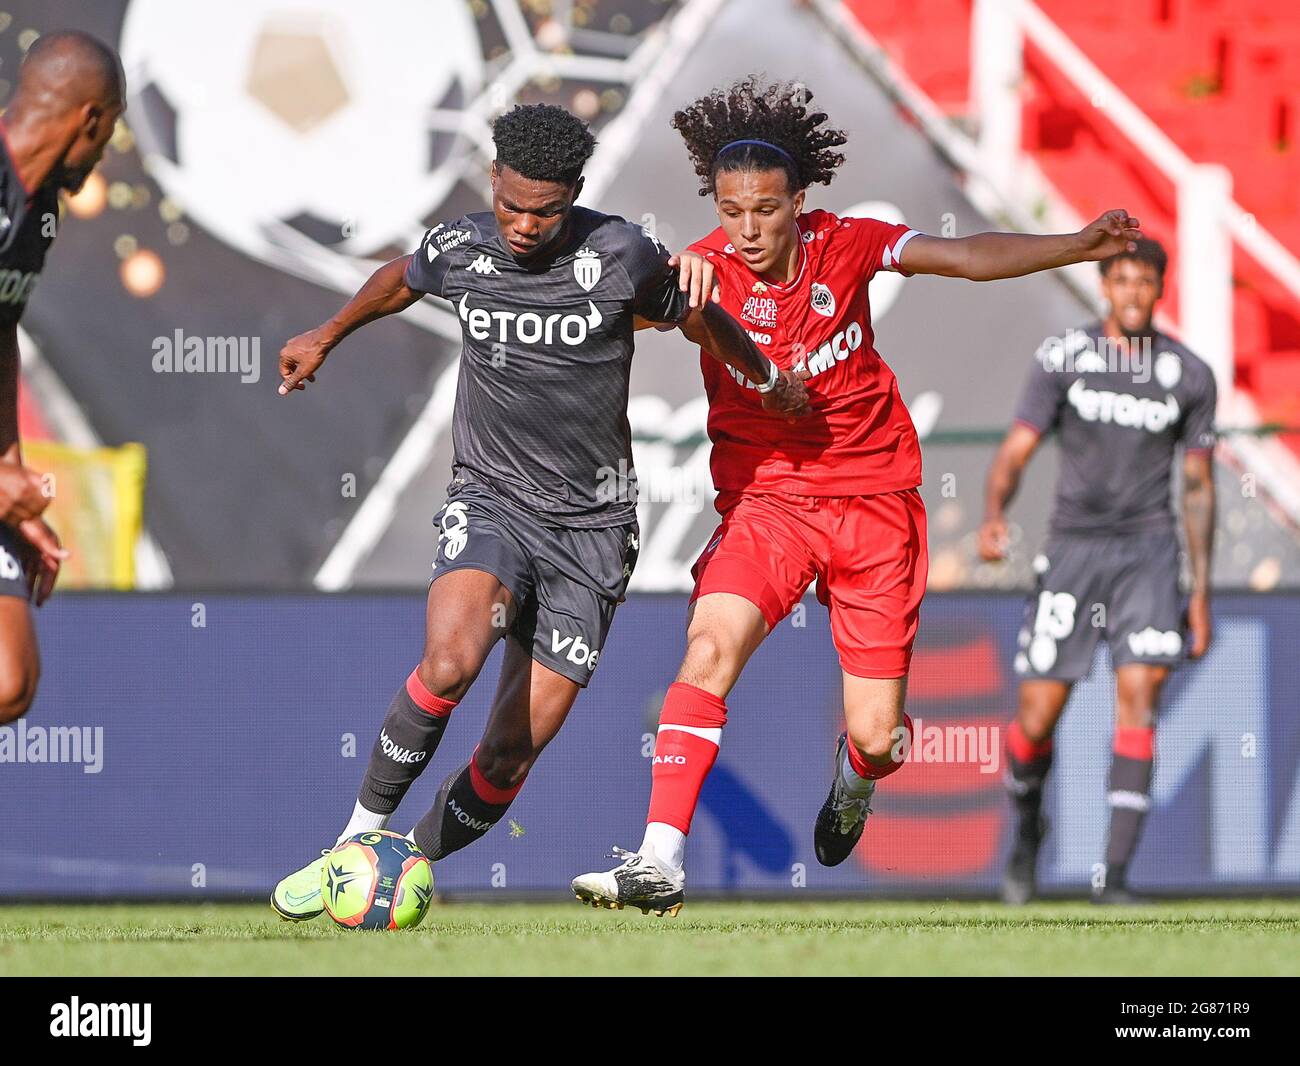 Monaco's Axel Disasi and Antwerp's Adam Zaanan pictured in action during a friendly soccer game between Belgian Royal Antwerp FC and French AS Monaco, Stock Photo